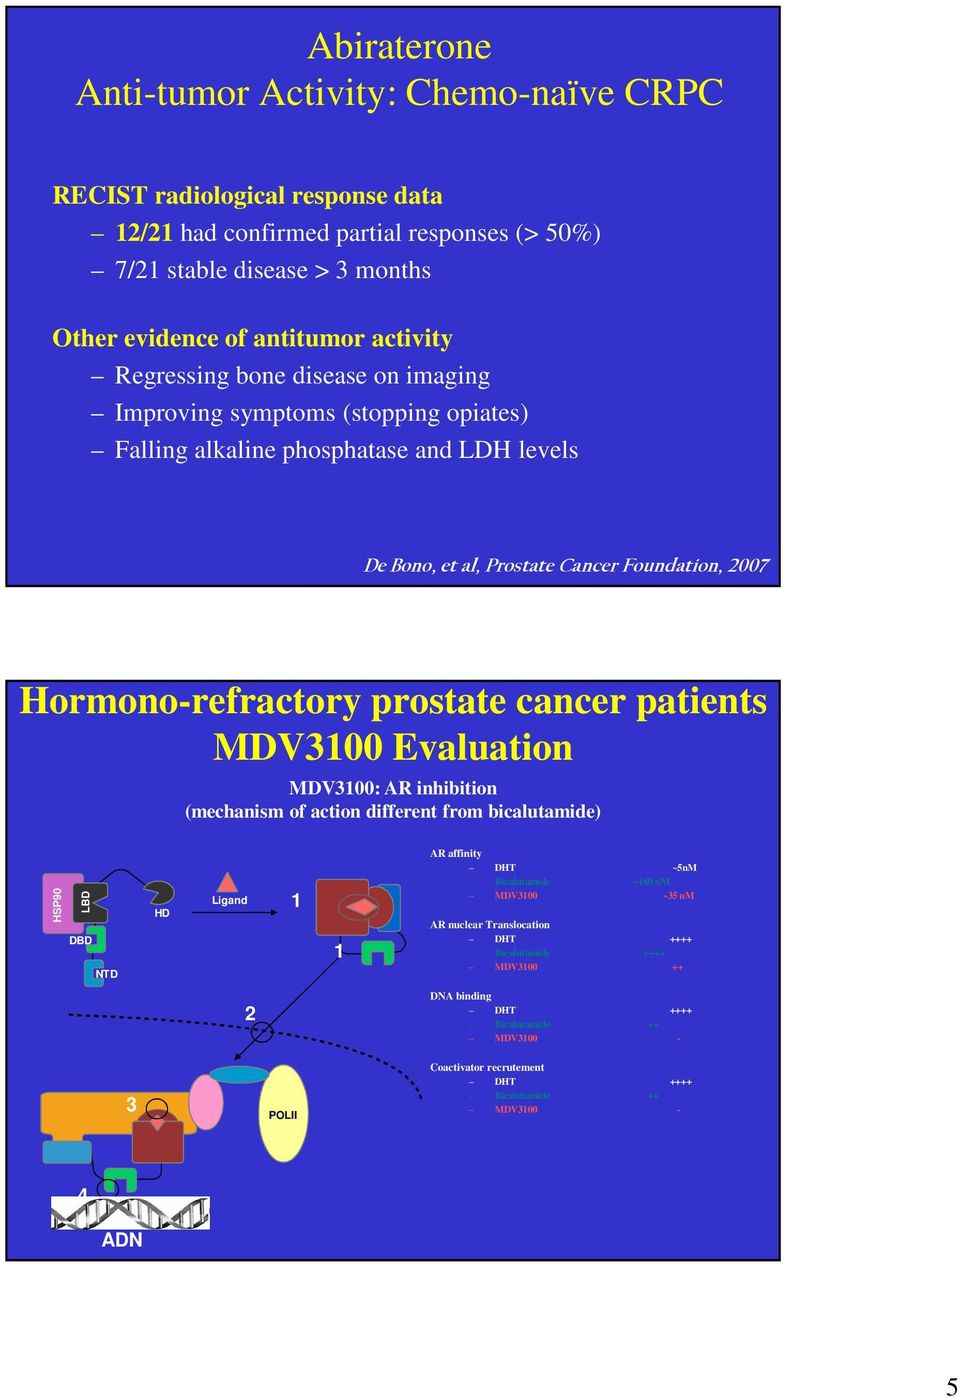 Hormono-refractory prostate cancer patients MDV3100 Evaluation MDV3100: AR inhibition (mechanism of action different from bicalutamide) HSP90 LBD DBD NTD HD Ligand 1 1 AR affinity DHT ~5nM